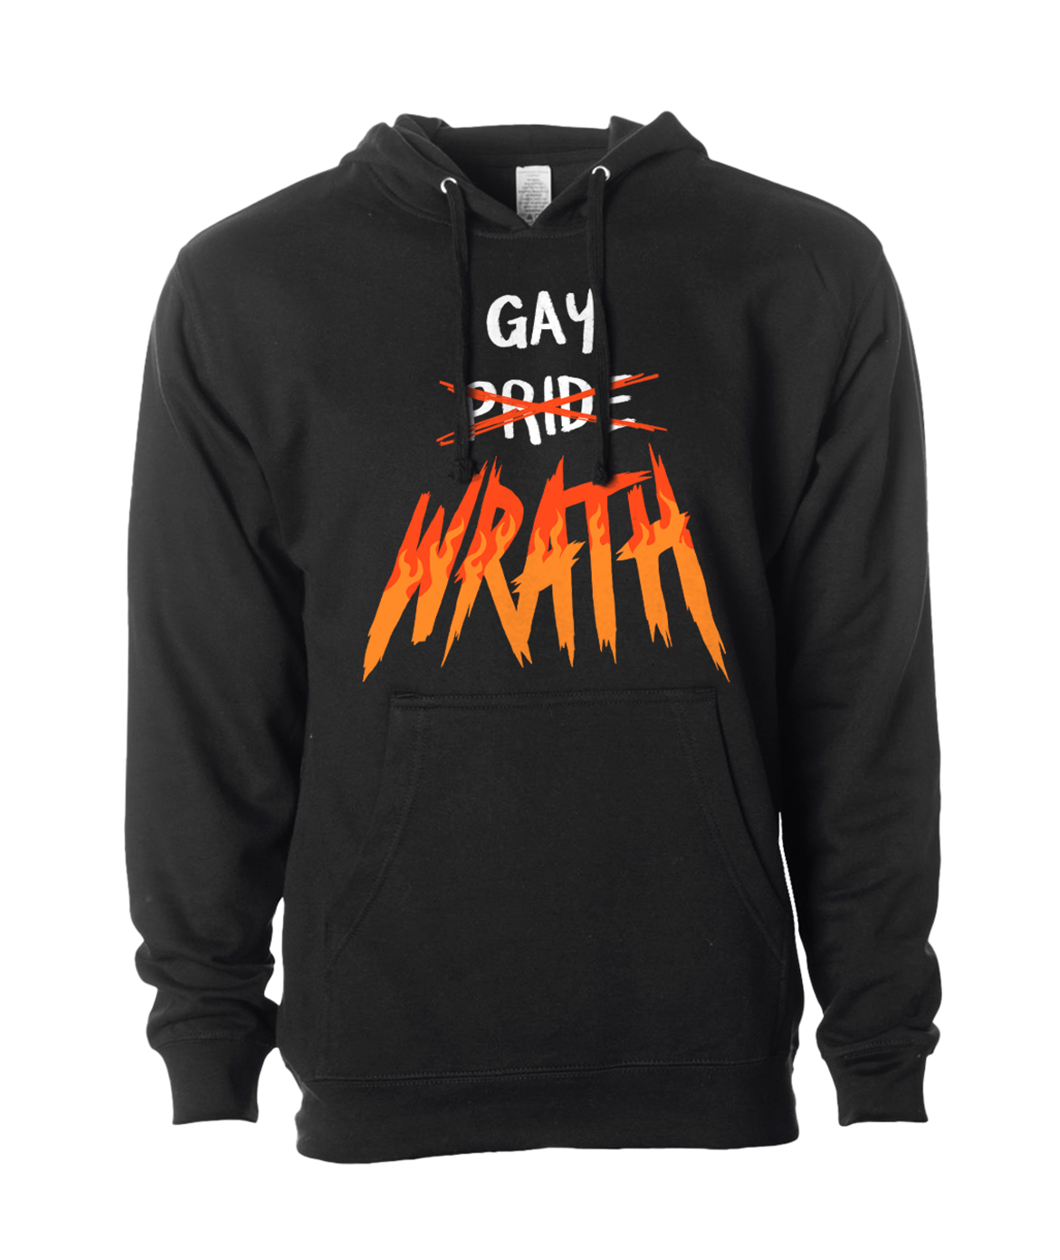 A black hoodie with the word “Gay” in white handwritten font with the word “Pride” below in white handwritten font. The word is crossed out with two red lines. Below, “Wrath” is written in large red font with orange flames inside of the letters - from Mars Heyward